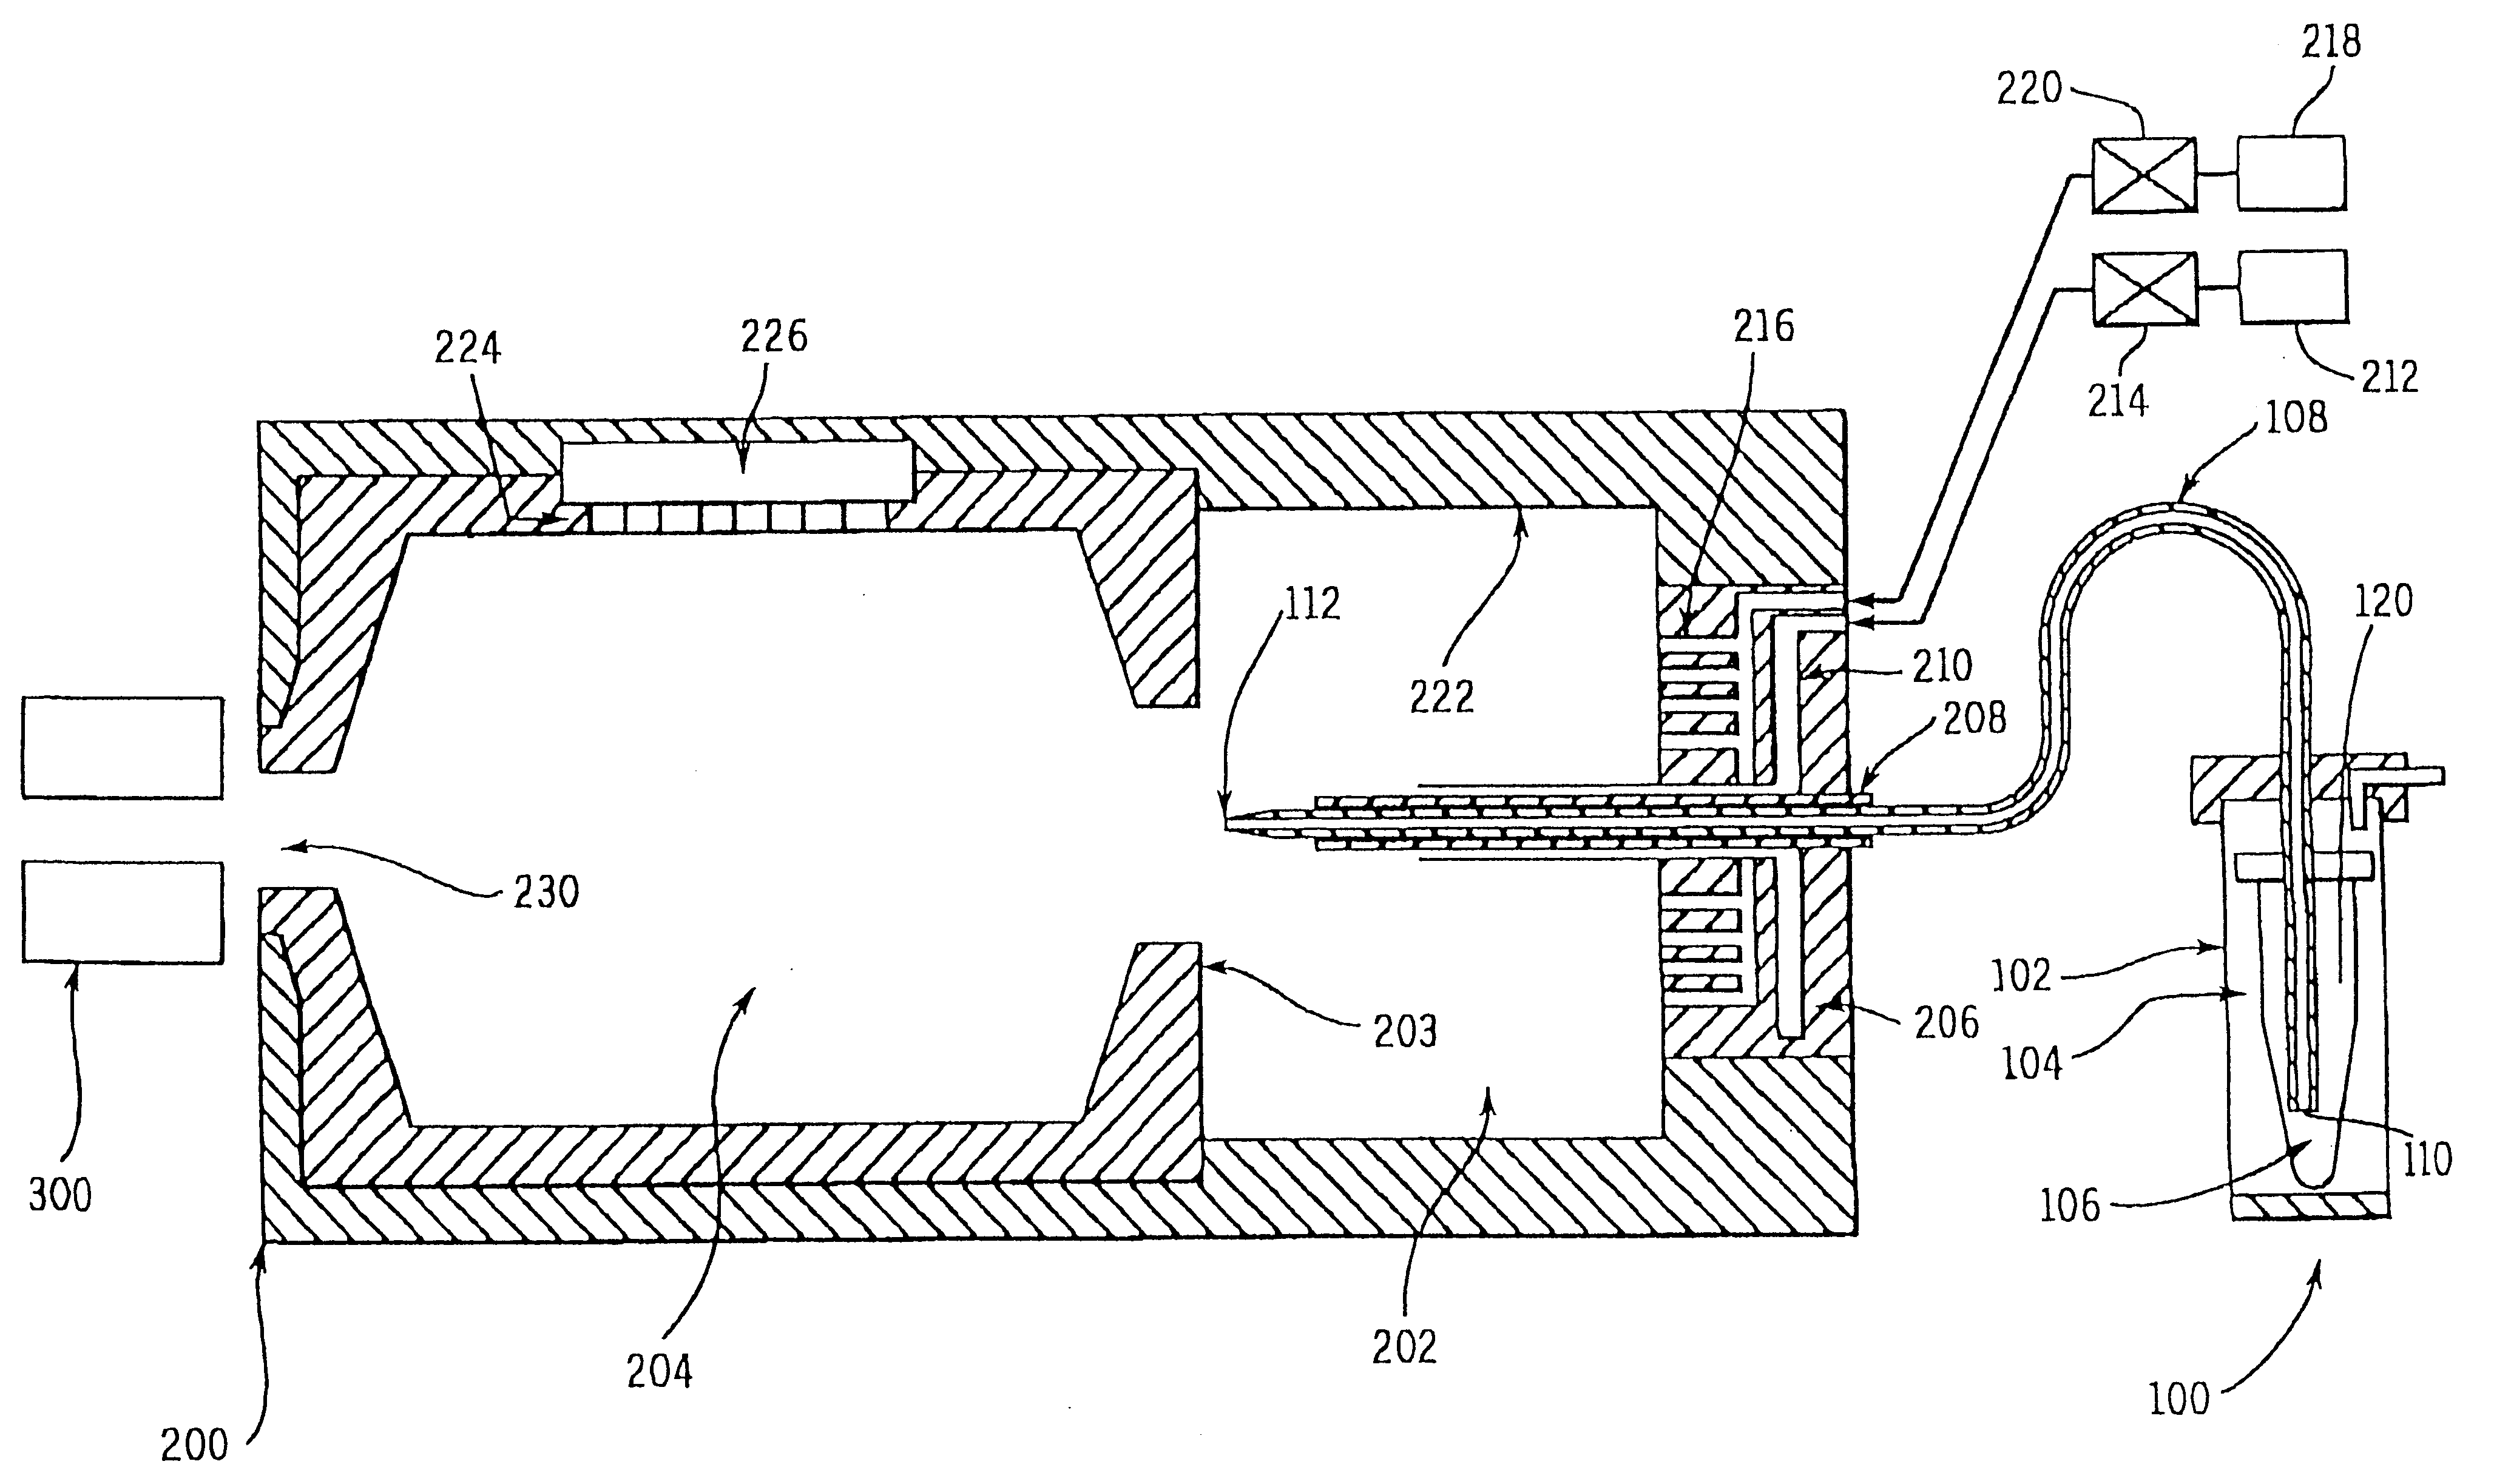 Charge reduction in electrospray mass spectrometry